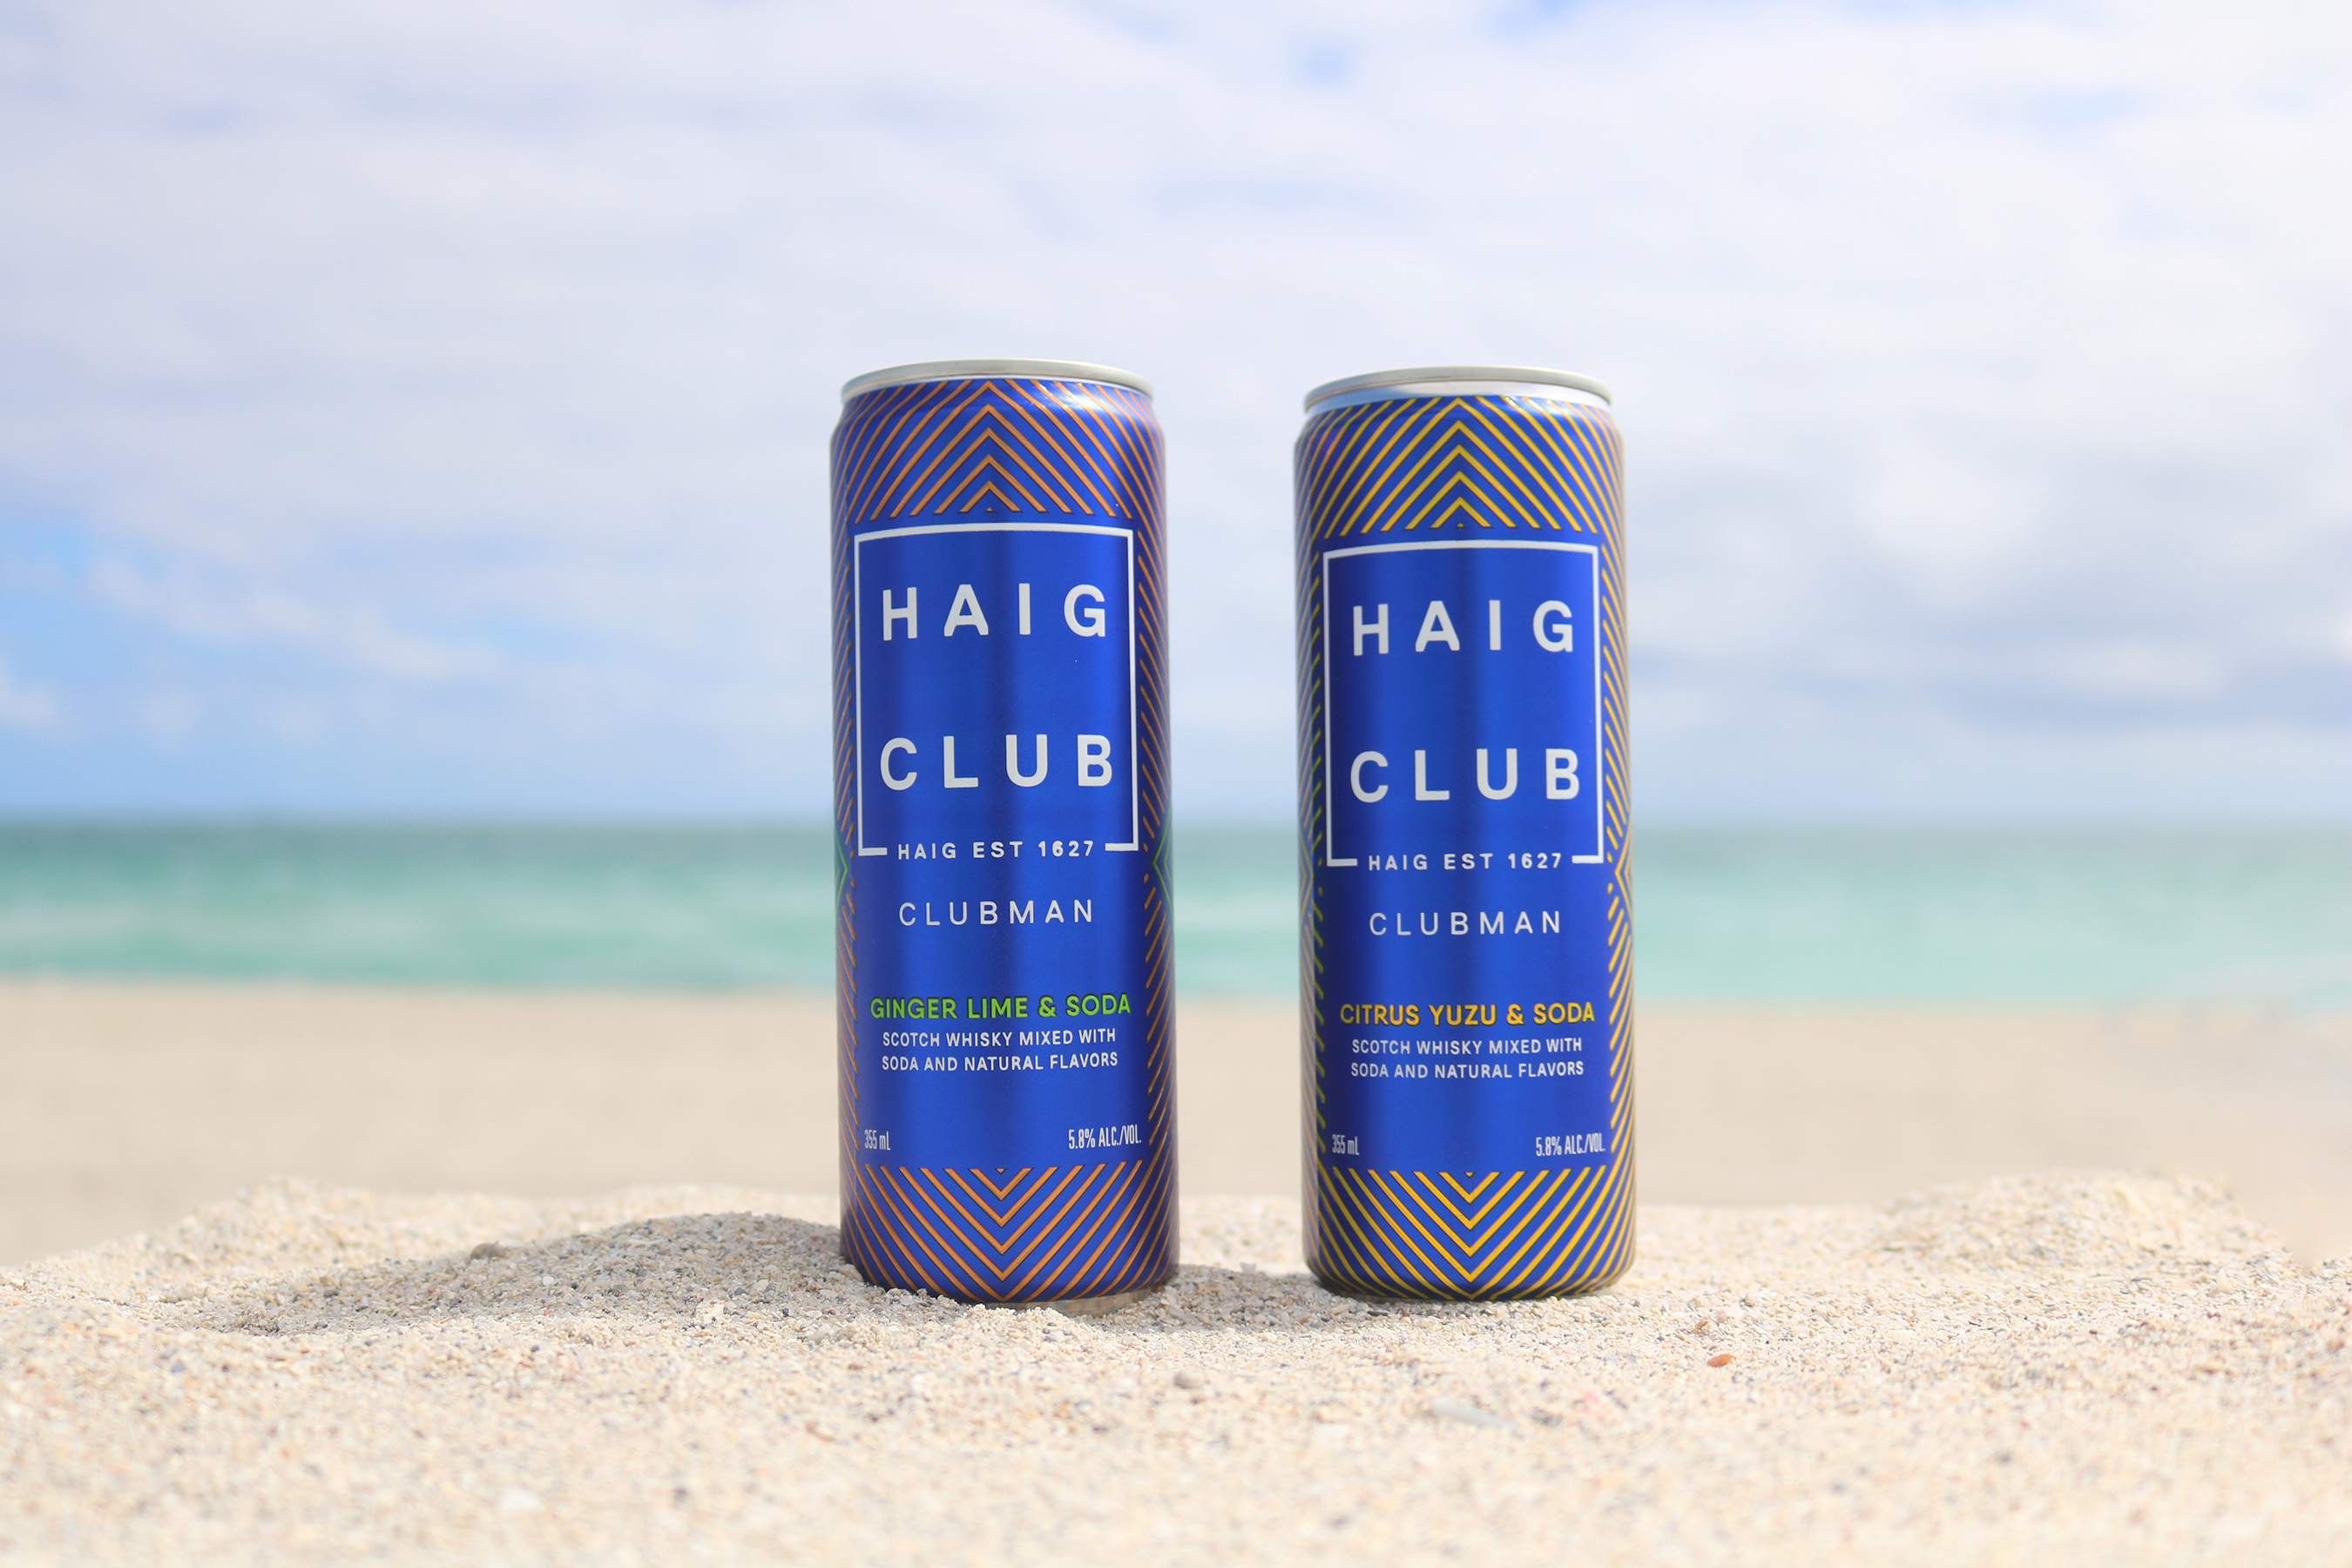 Available in Ginger Lime & Soda and Citrus Yuzu & Soda, the liquids combine elevated, tropical ingredients with the light, smooth taste of Haig Club Clubman, the perfect bright and bold base for these effervescent canned cocktails. Photos courtesy of Peter Stepanek.